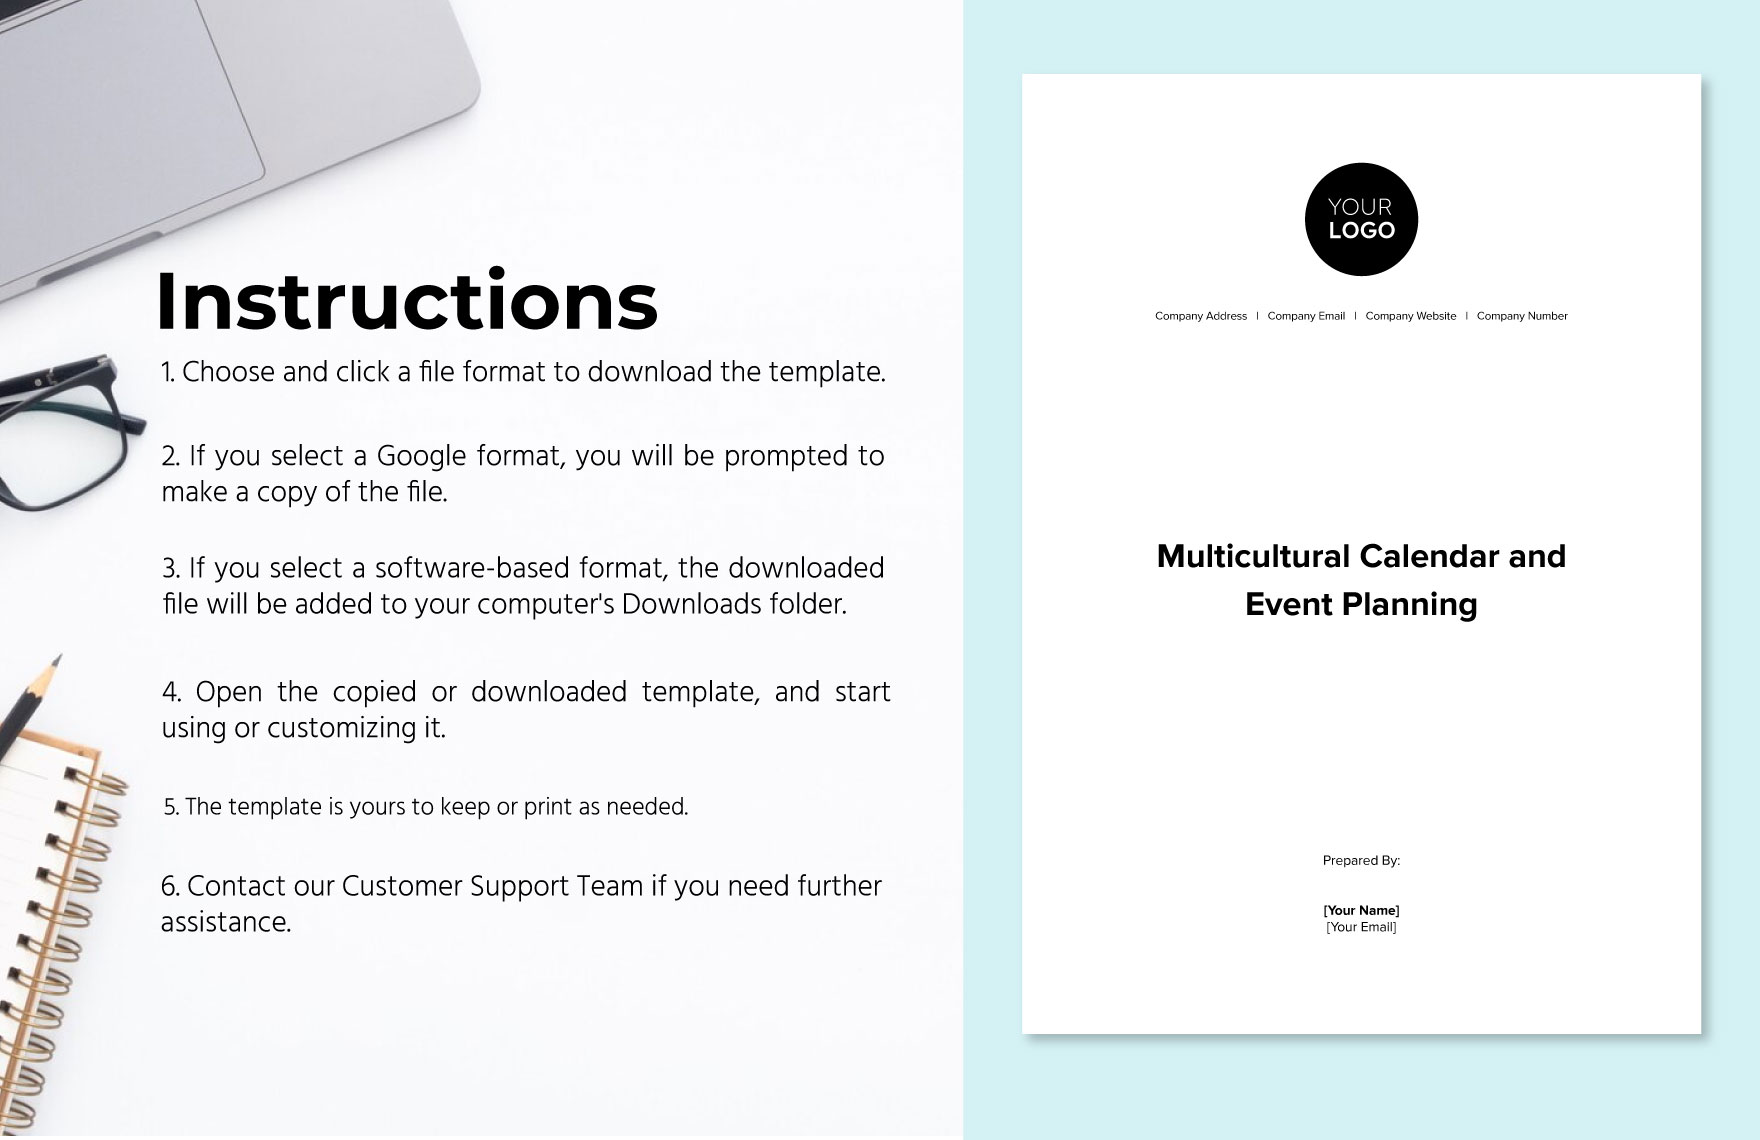 Multicultural Calendar and Event Planning HR Template